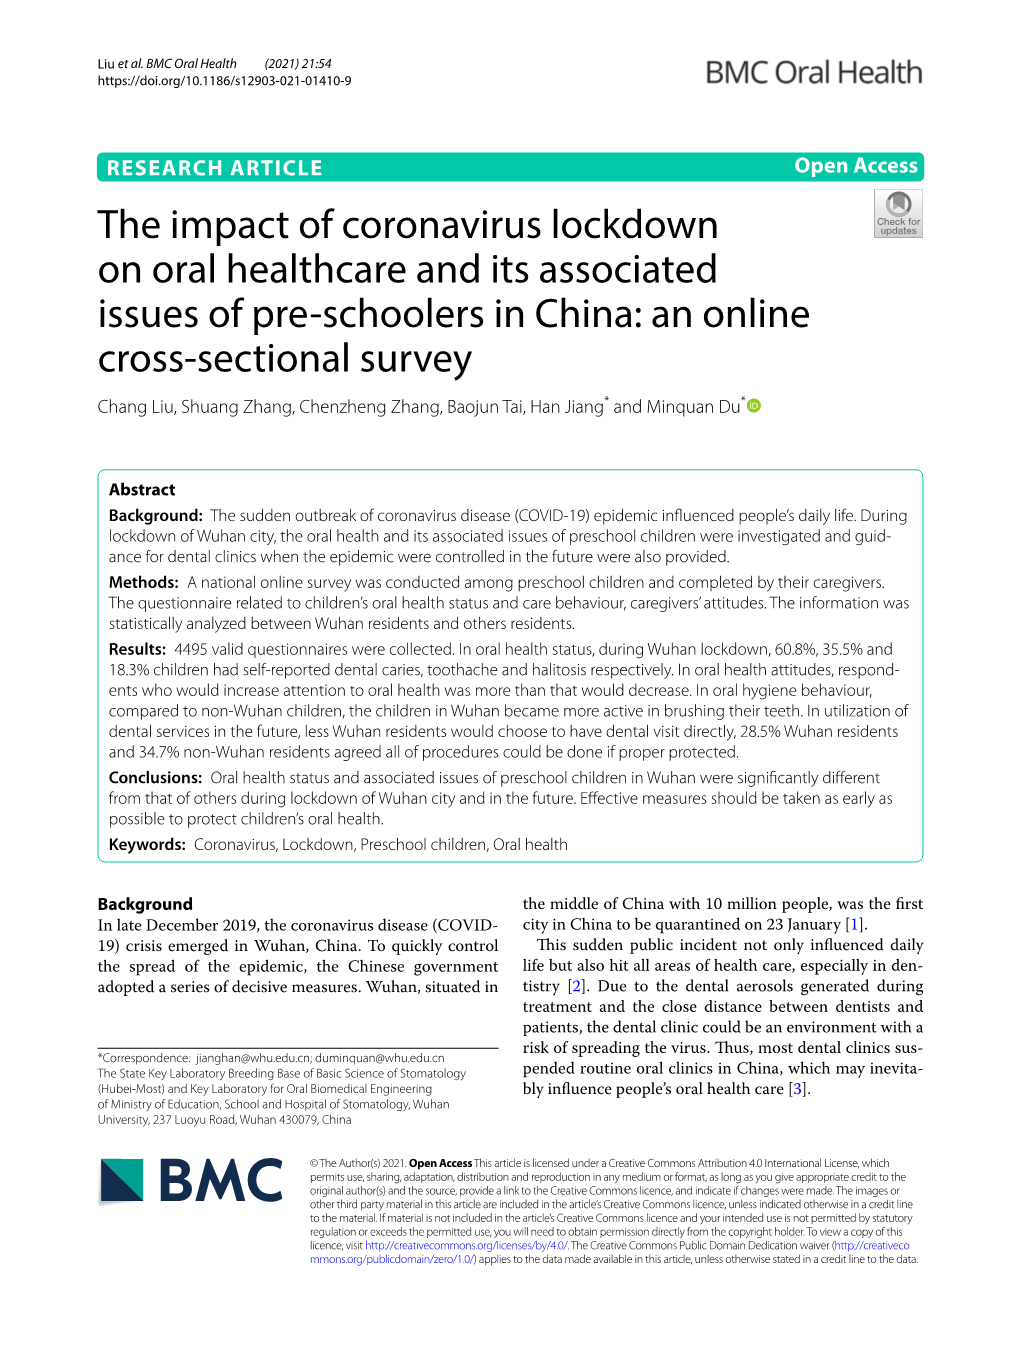 The Impact of Coronavirus Lockdown on Oral Healthcare and Its